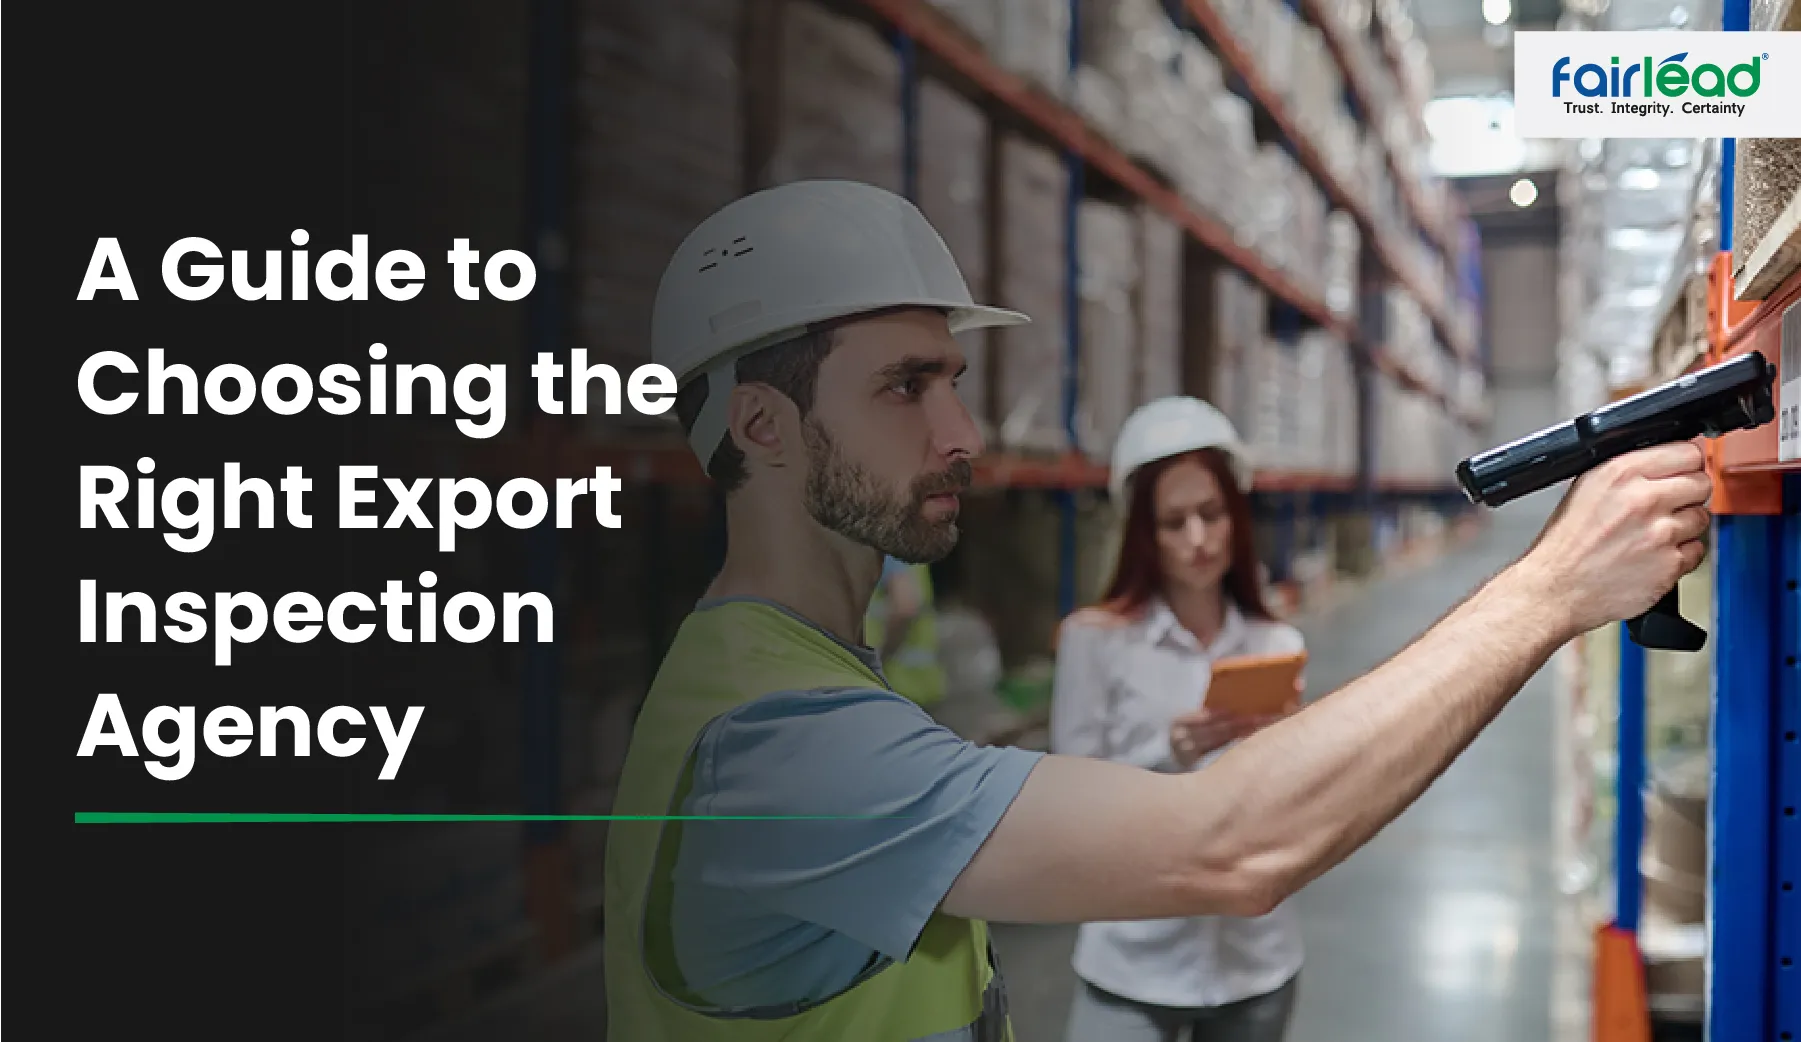 Guide to Choosing the Right Export Inspection Agency